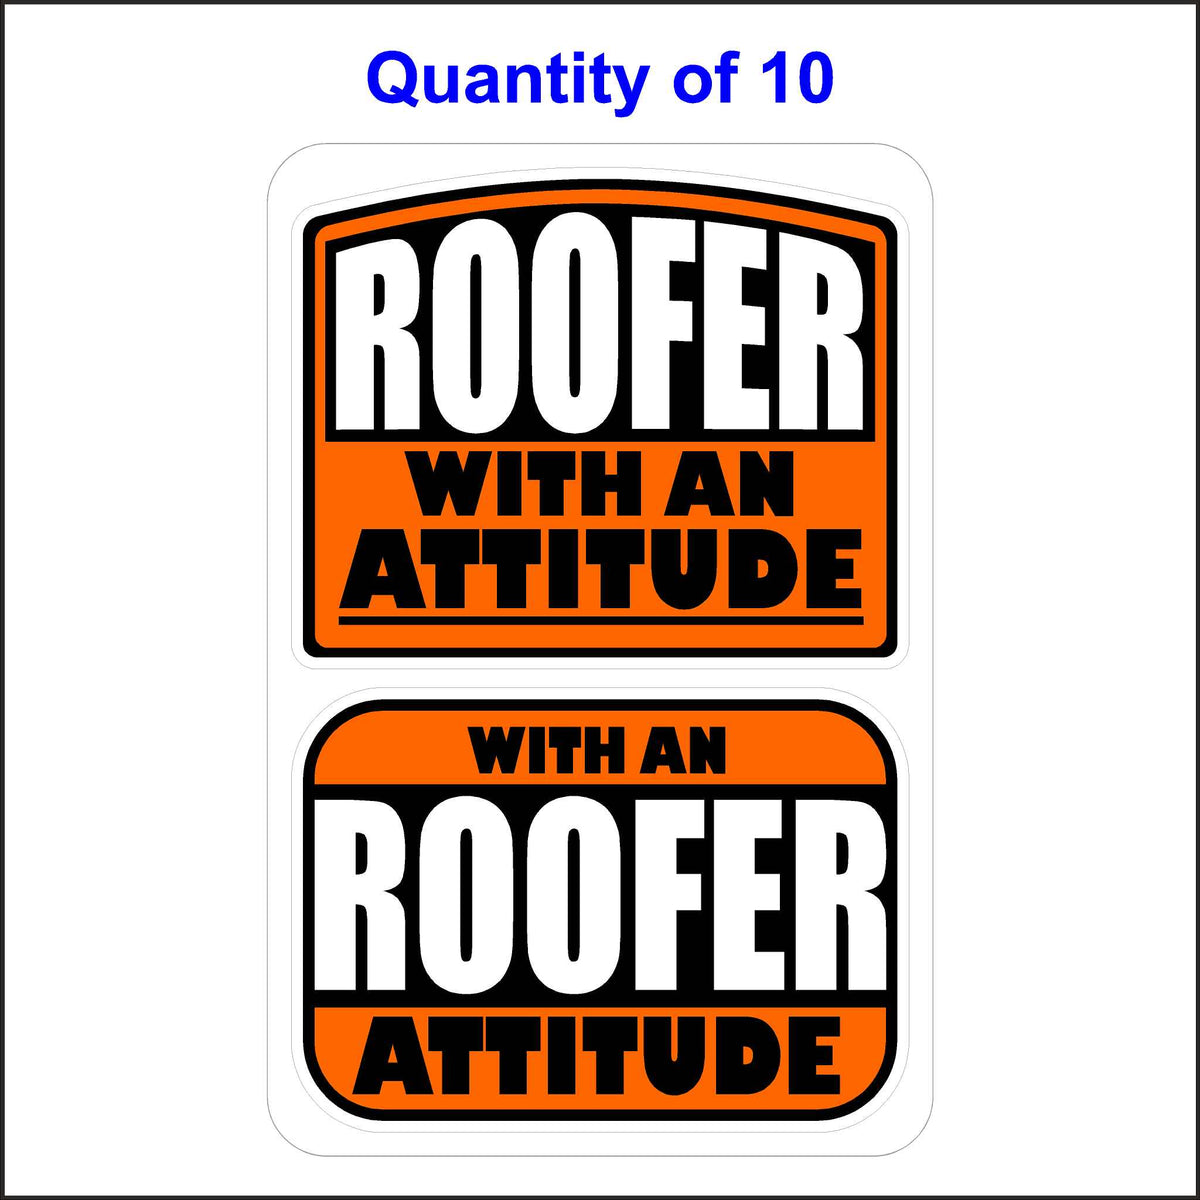 Roofer With An Attitude Stickers 10 Quantity.